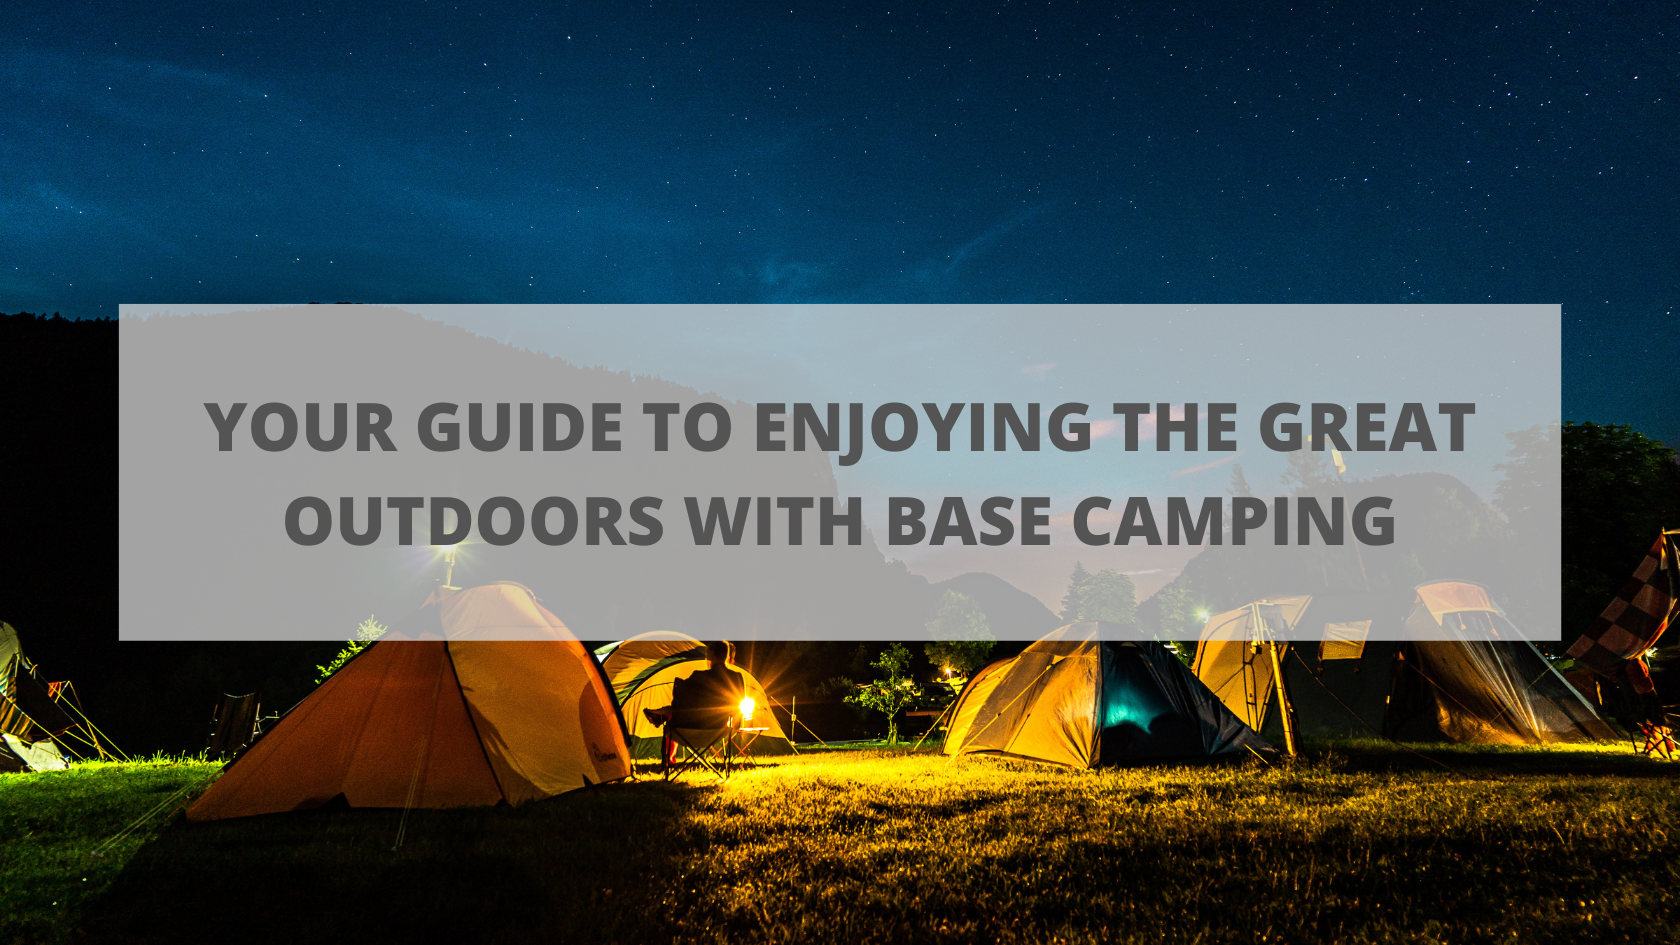 Your Guide to Enjoying the Great Outdoors with Base Camping